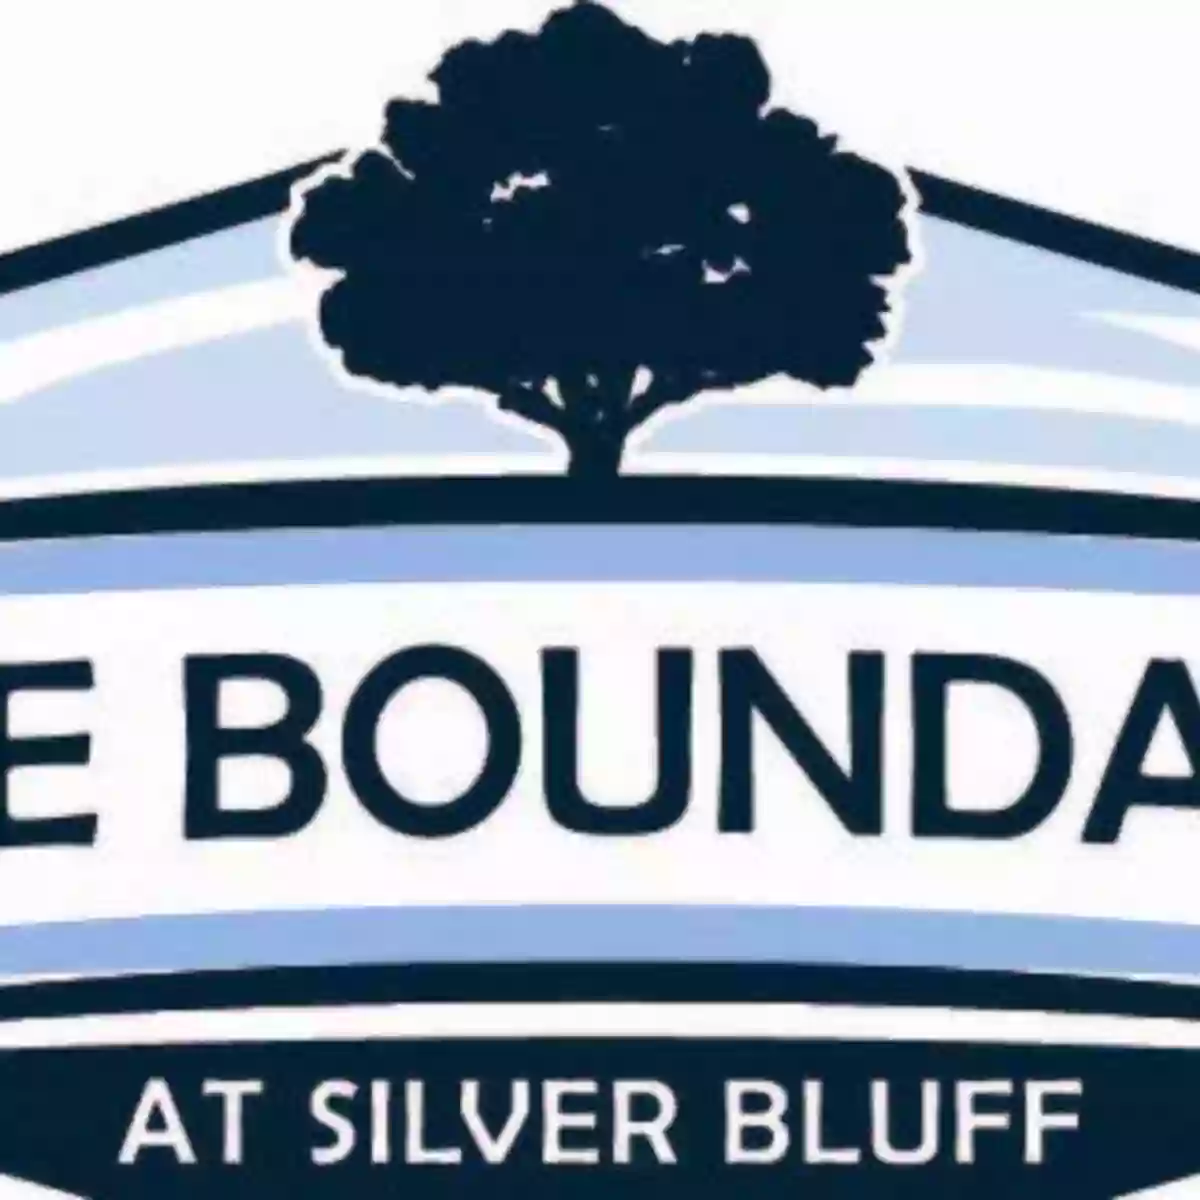 The Boundary at Silver Bluff